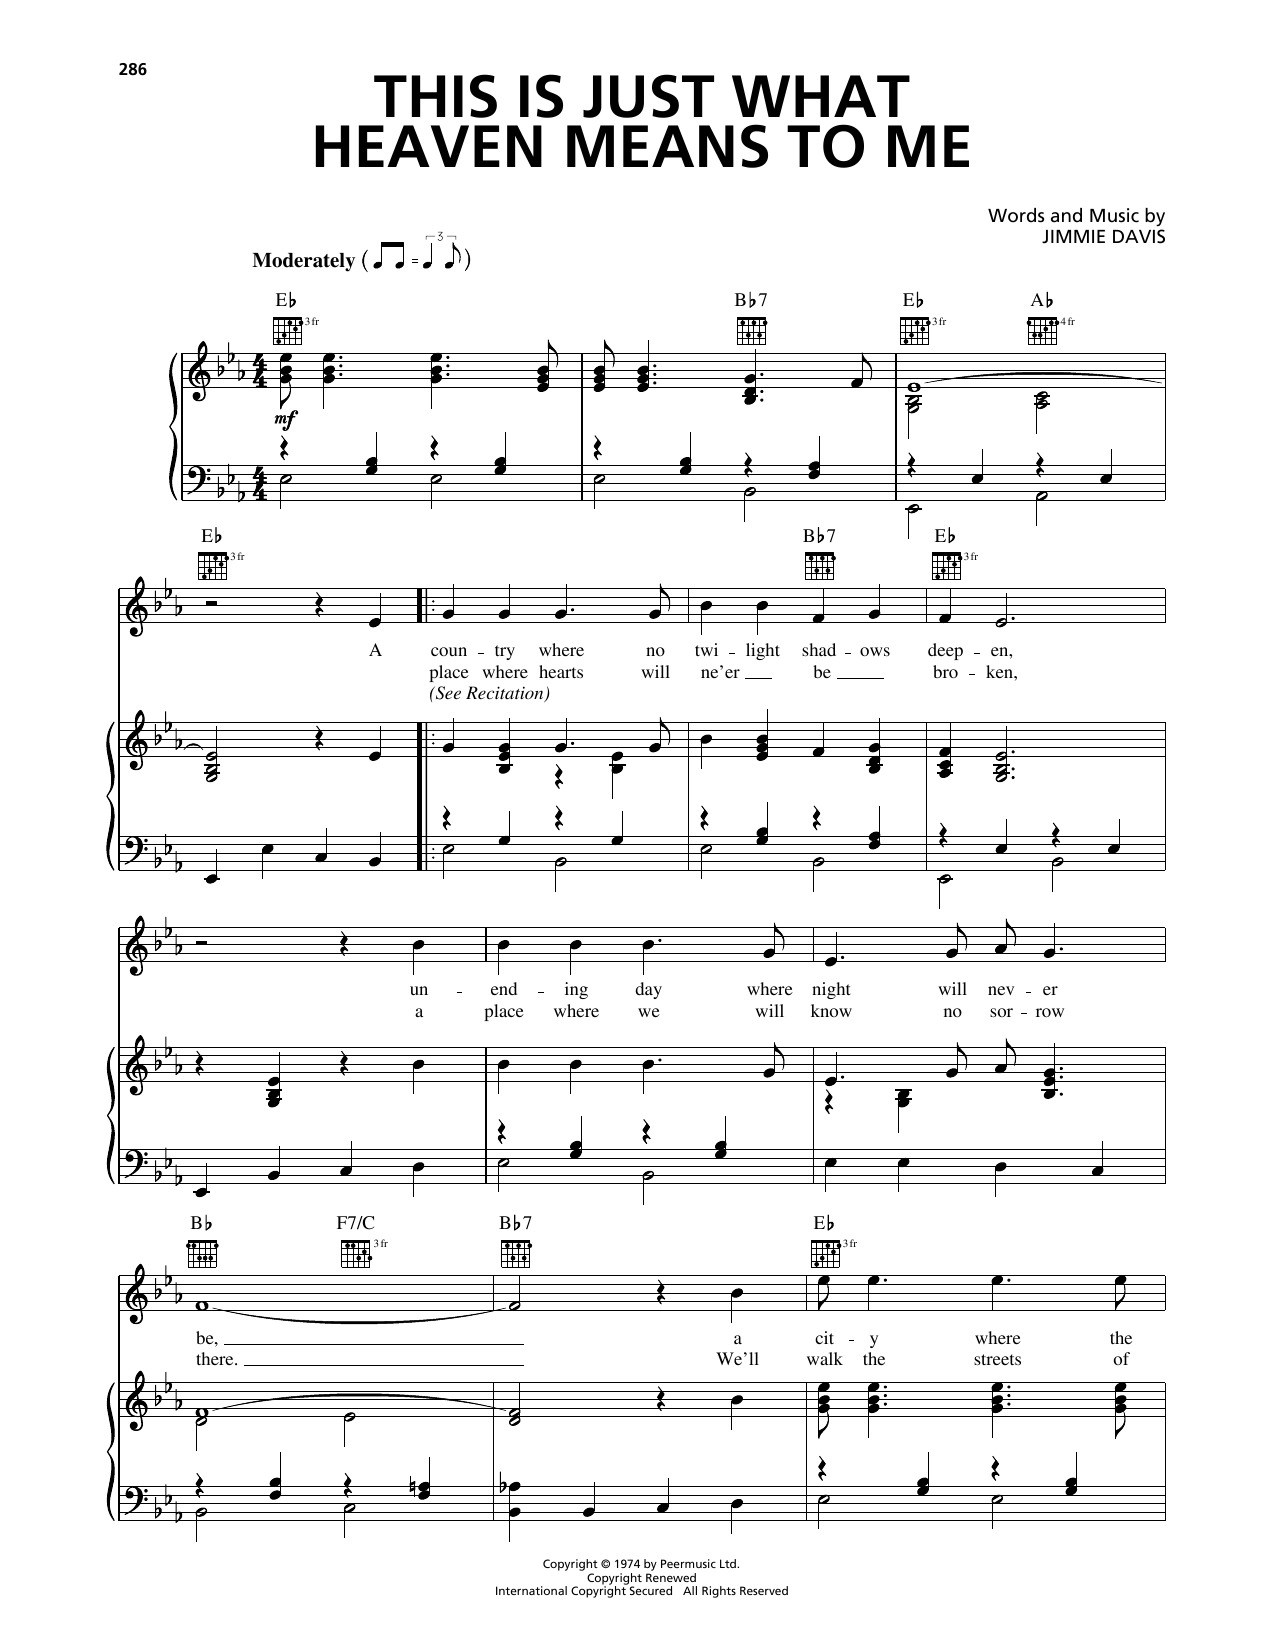 Download Jimmie Davis This Is Just What Heaven Means To Me Sheet Music